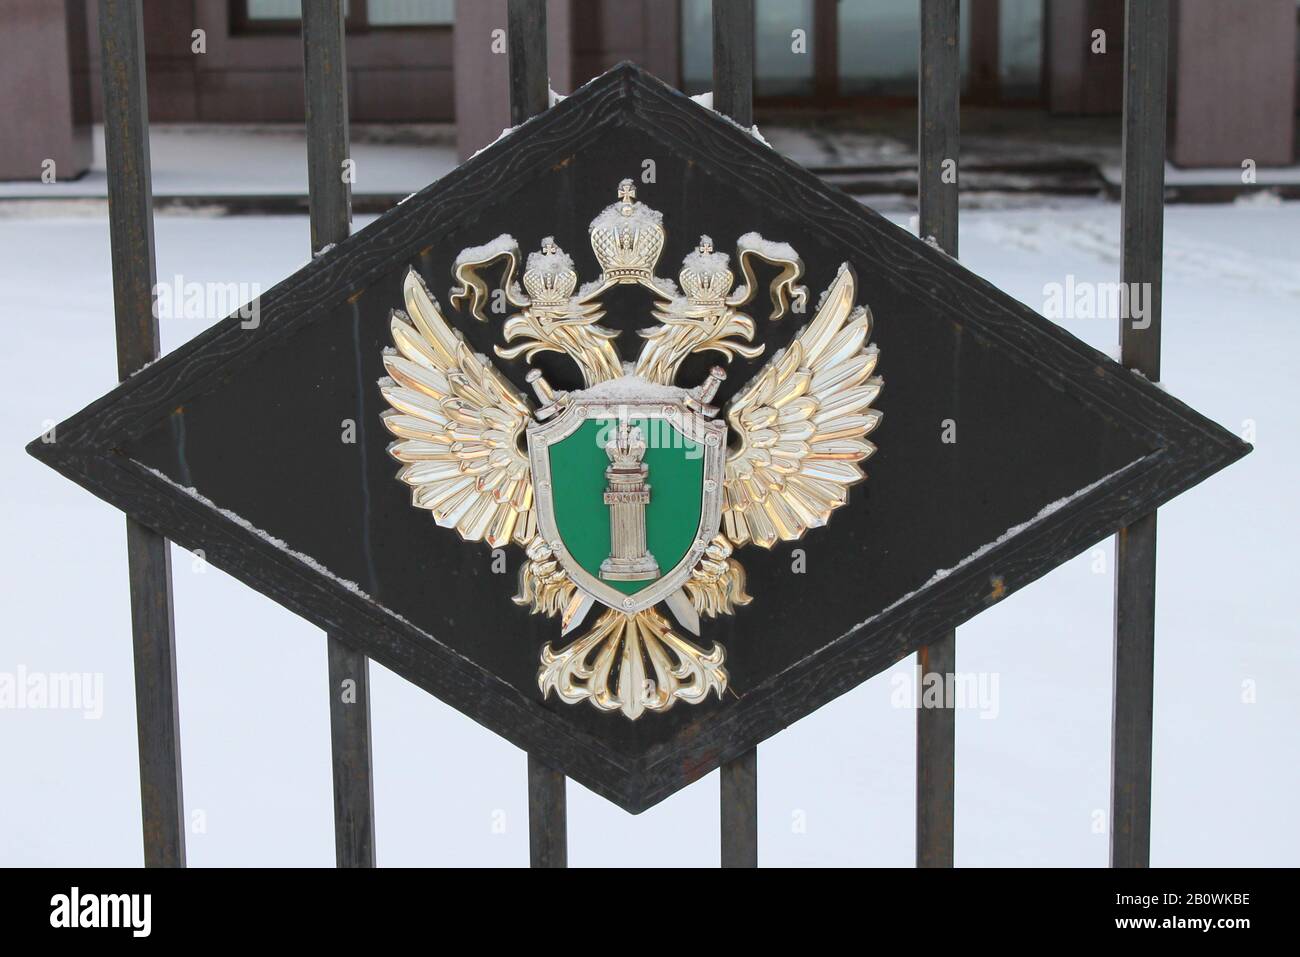 Emblem of the prosecutor's office, state symbols, the figure of a double-headed eagle on a metal black gate. Stock photo wit empty space for text and design. Stock Photo